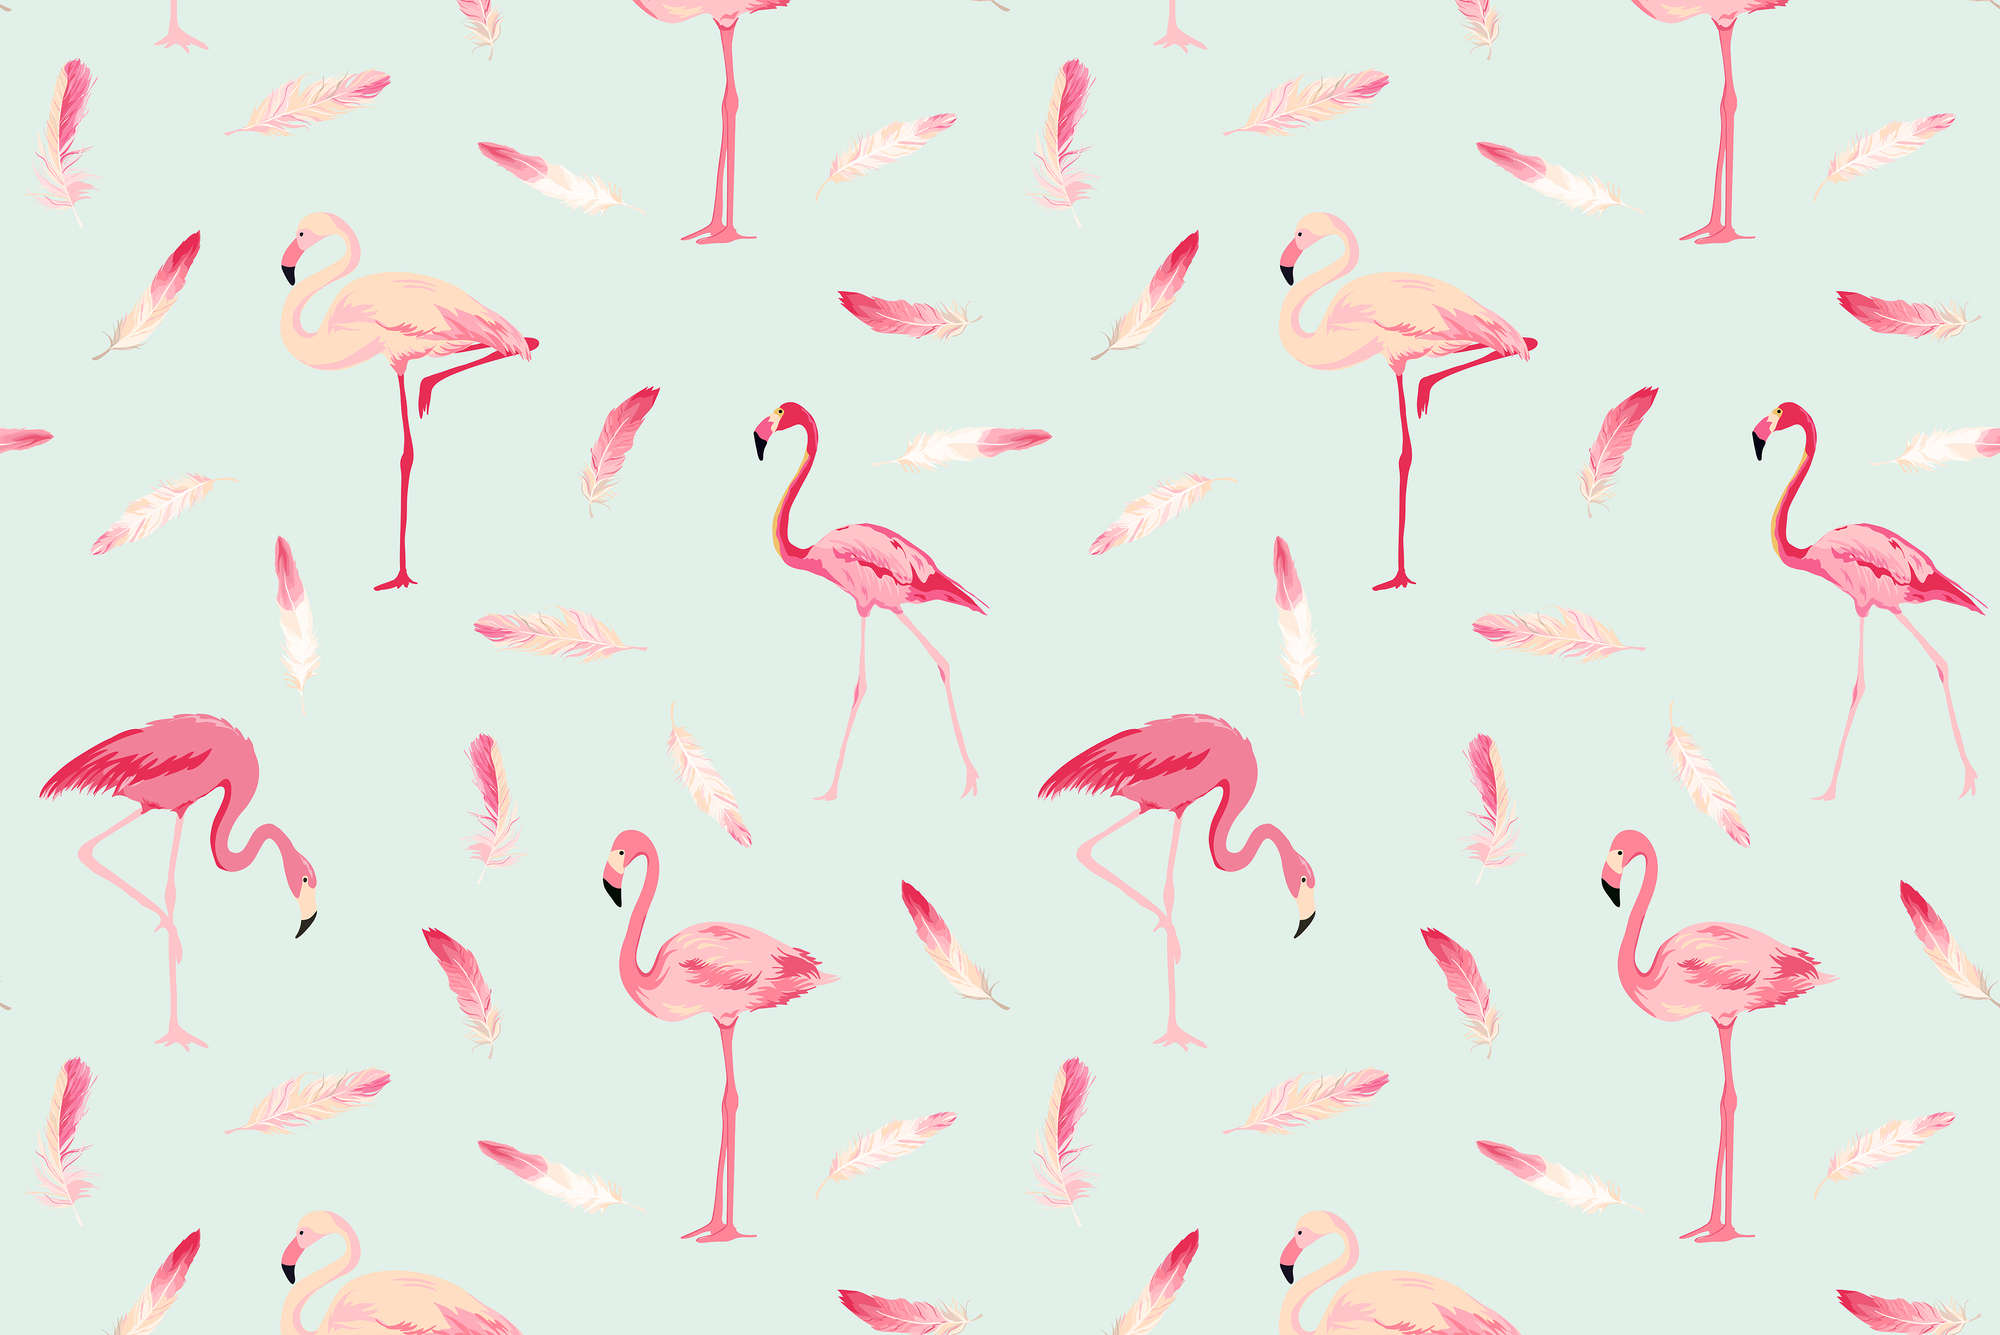             Graphic mural flamingos and feathers on matt smooth non-woven
        